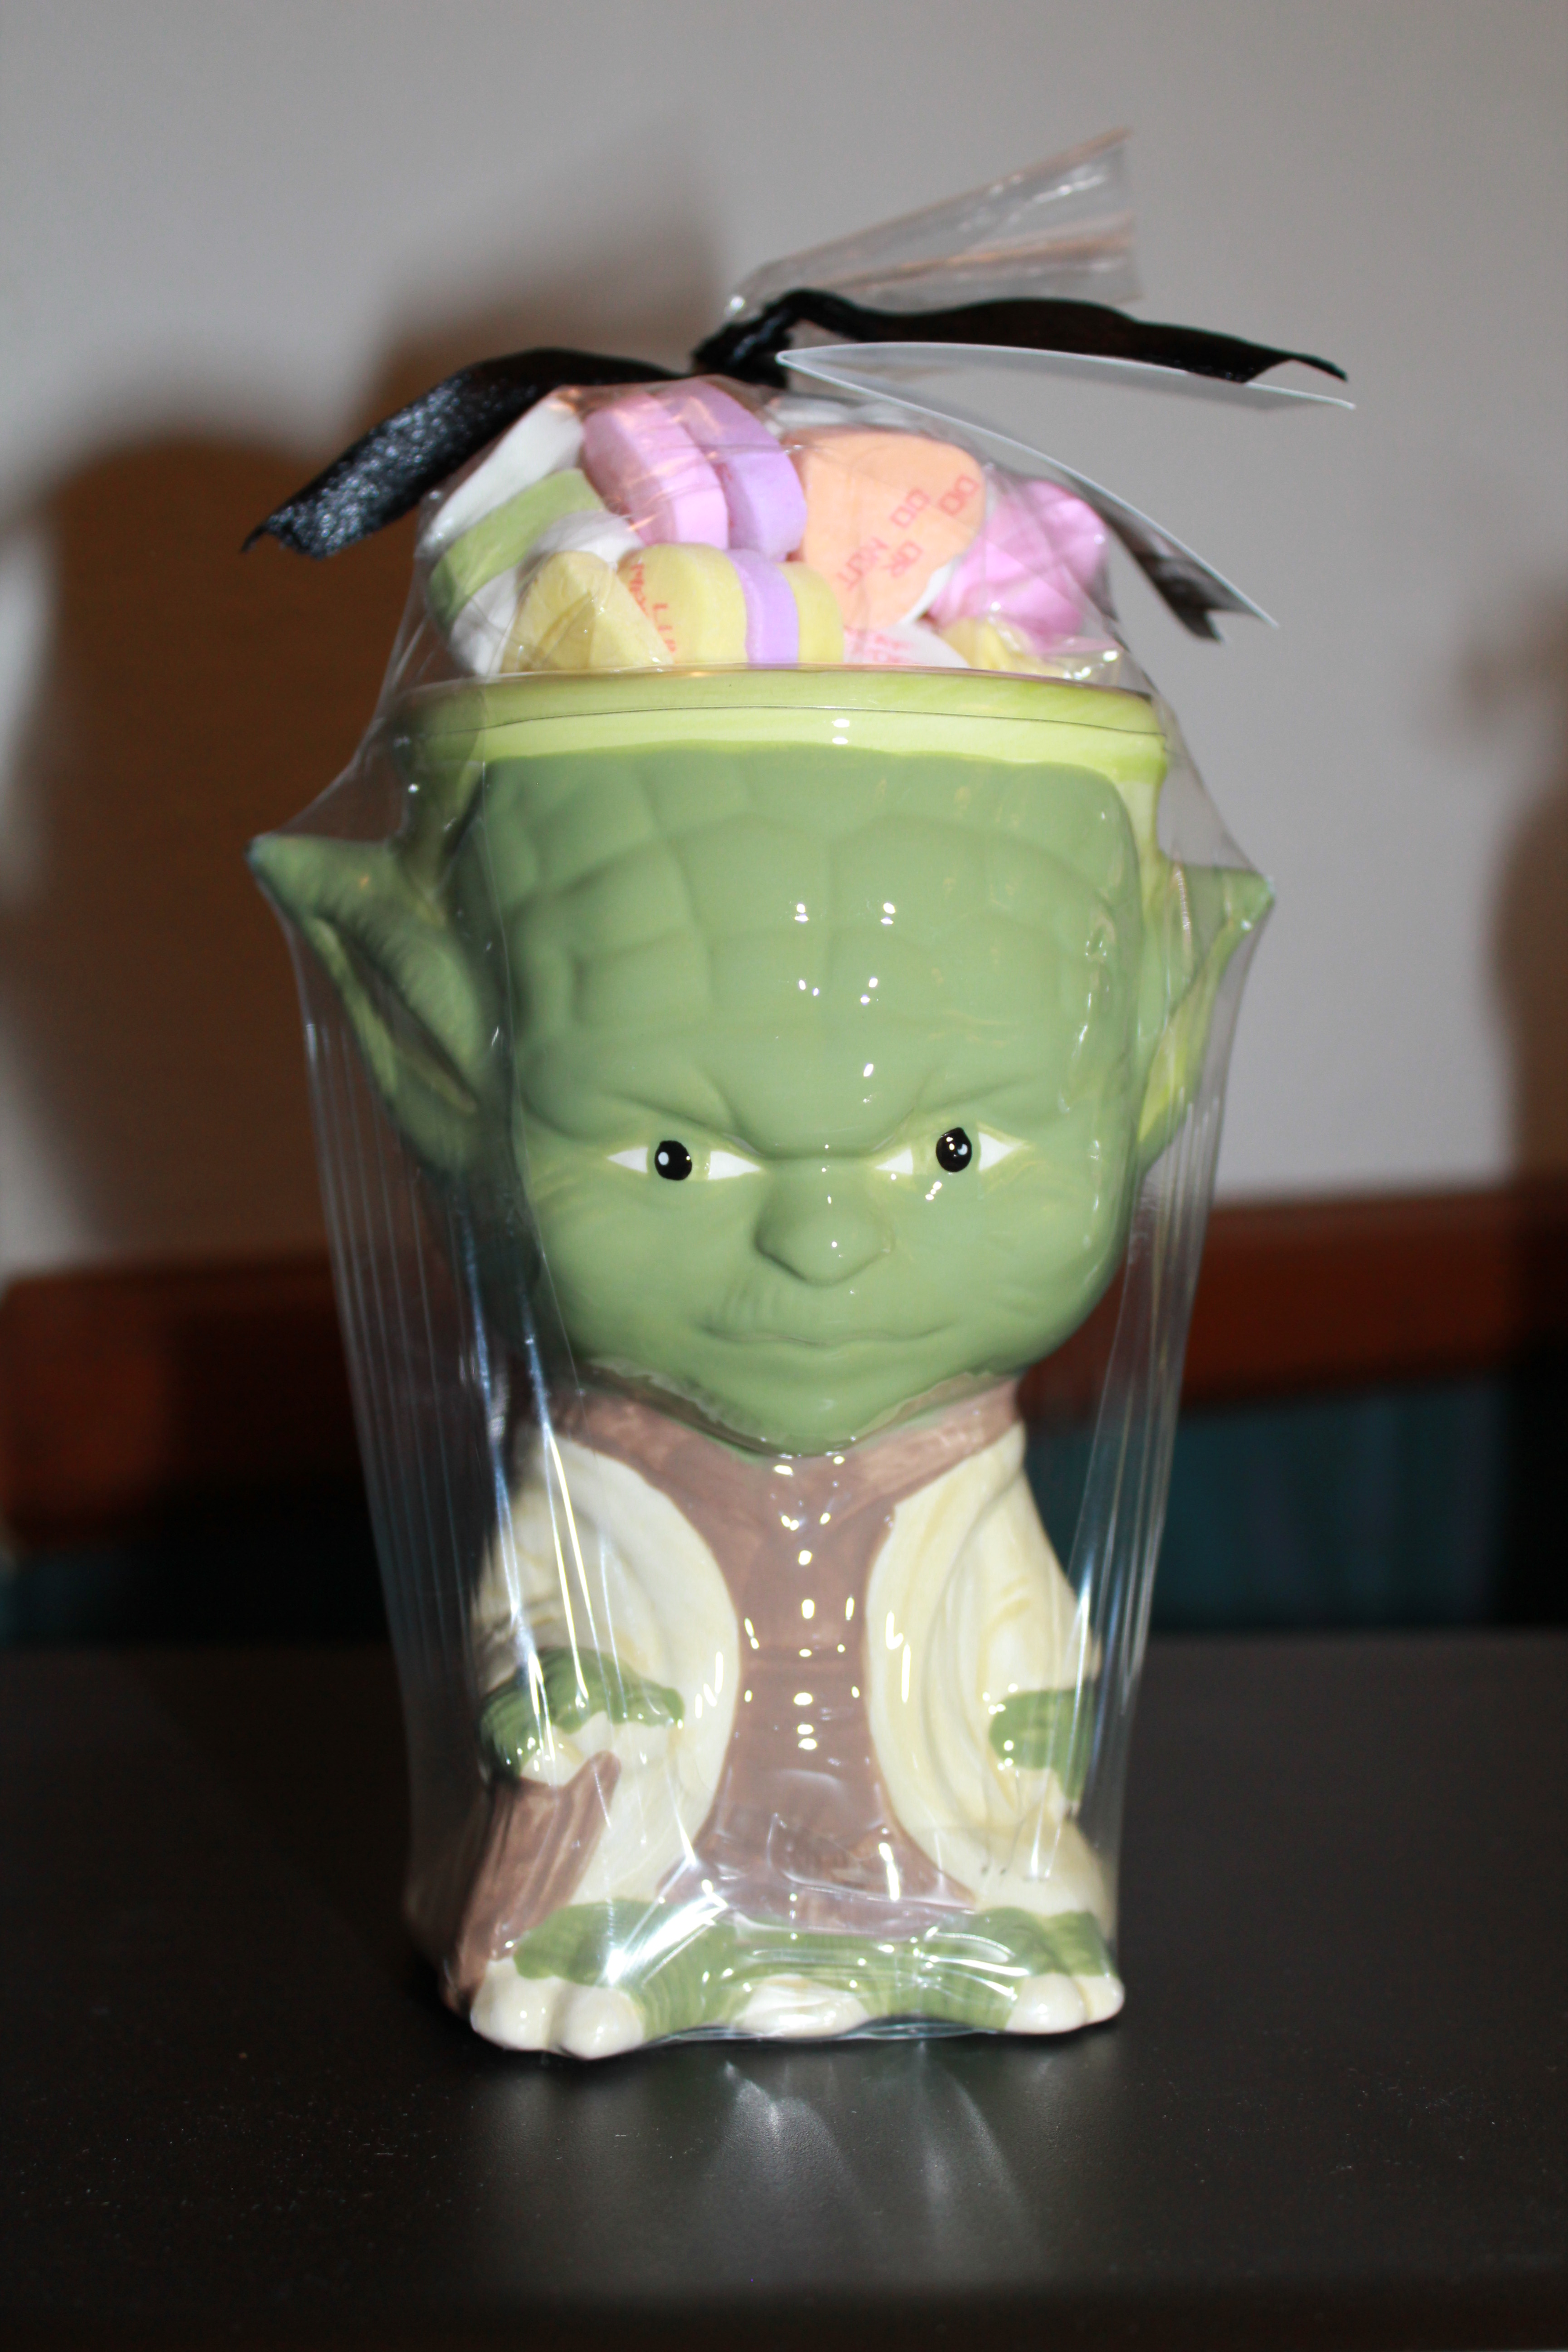 Star Wars Valentine's Day Galerie and M&M's Goodies From Target